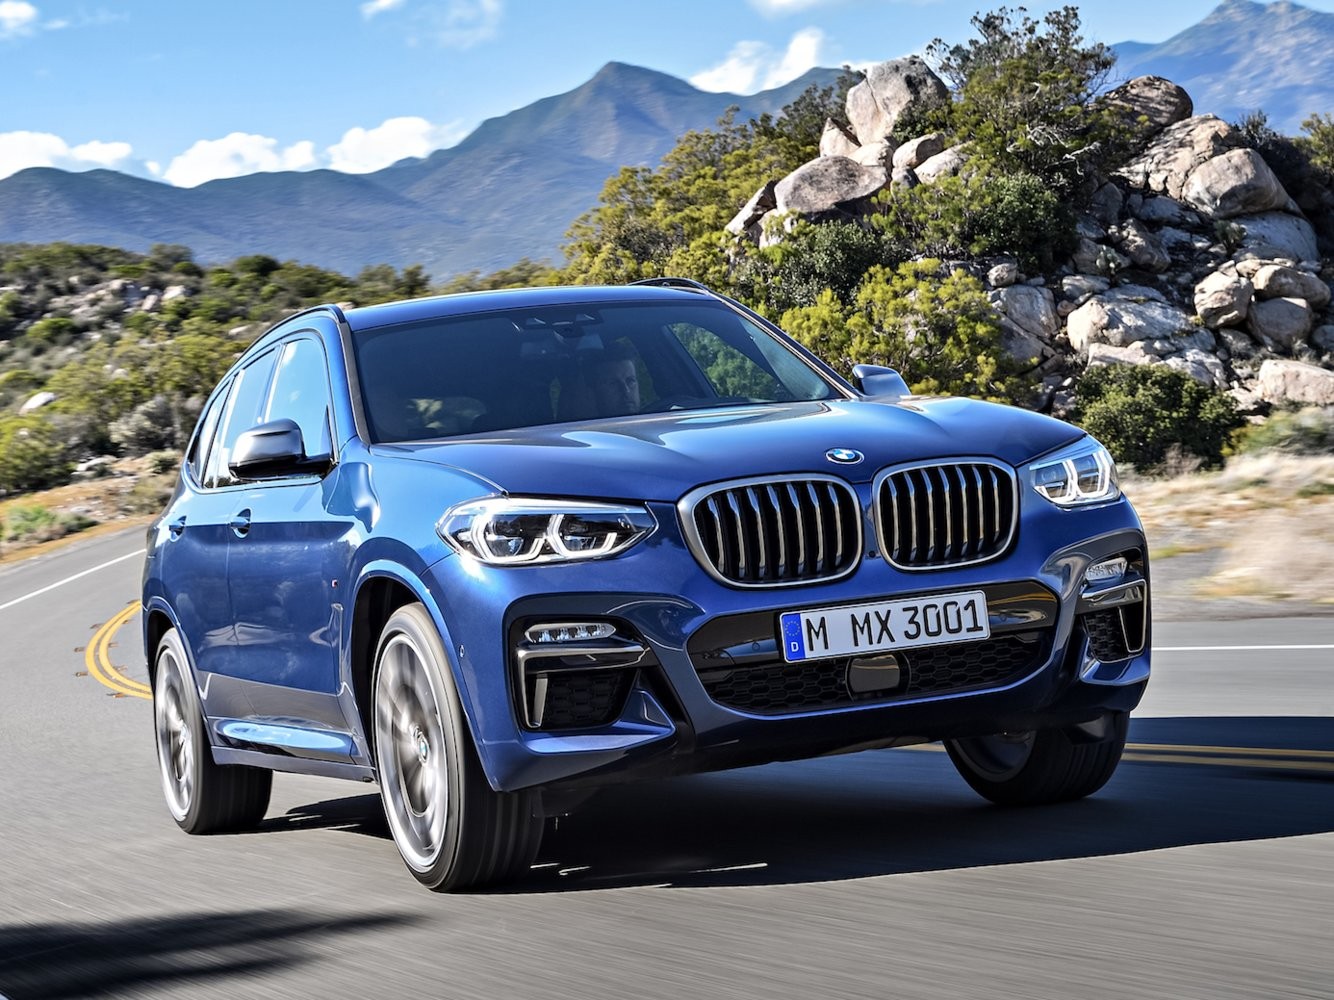 The BMW X3 is listed among the Insurance Institute for Highway Safety picks for the safest cars in 2019. Photo: BMW